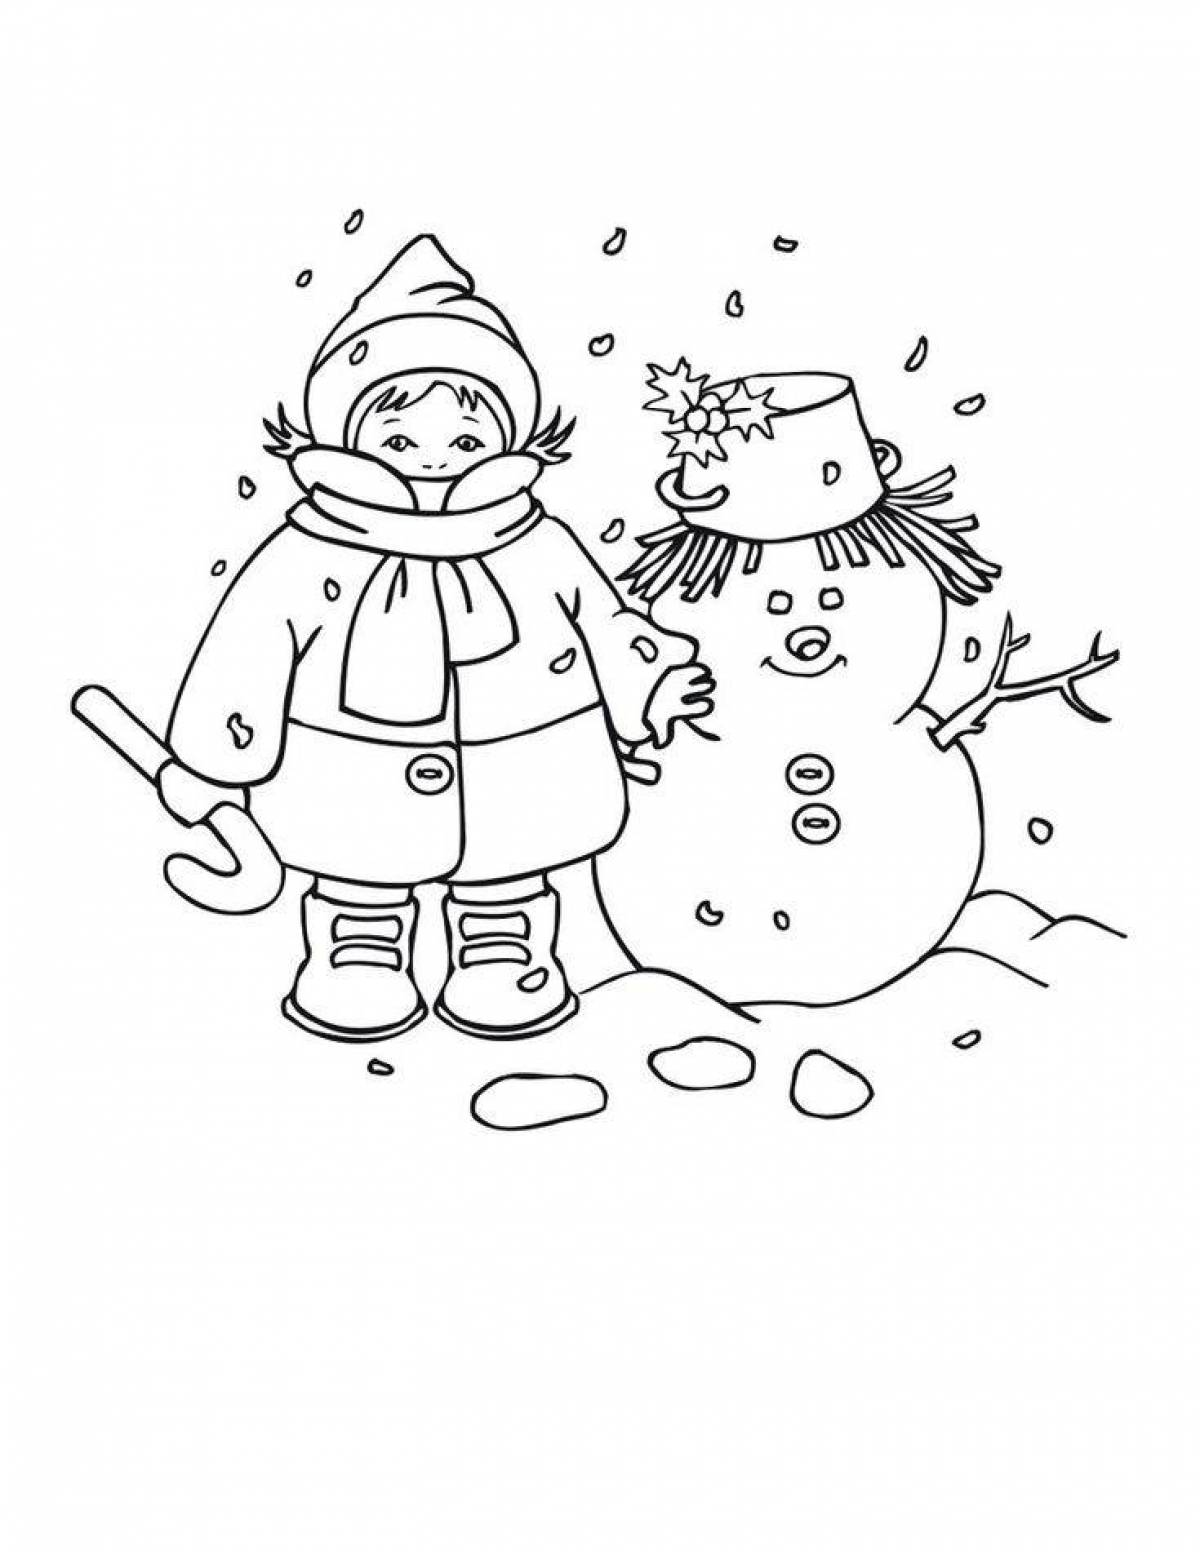 Funny winter coloring book for kids 5-6 years old